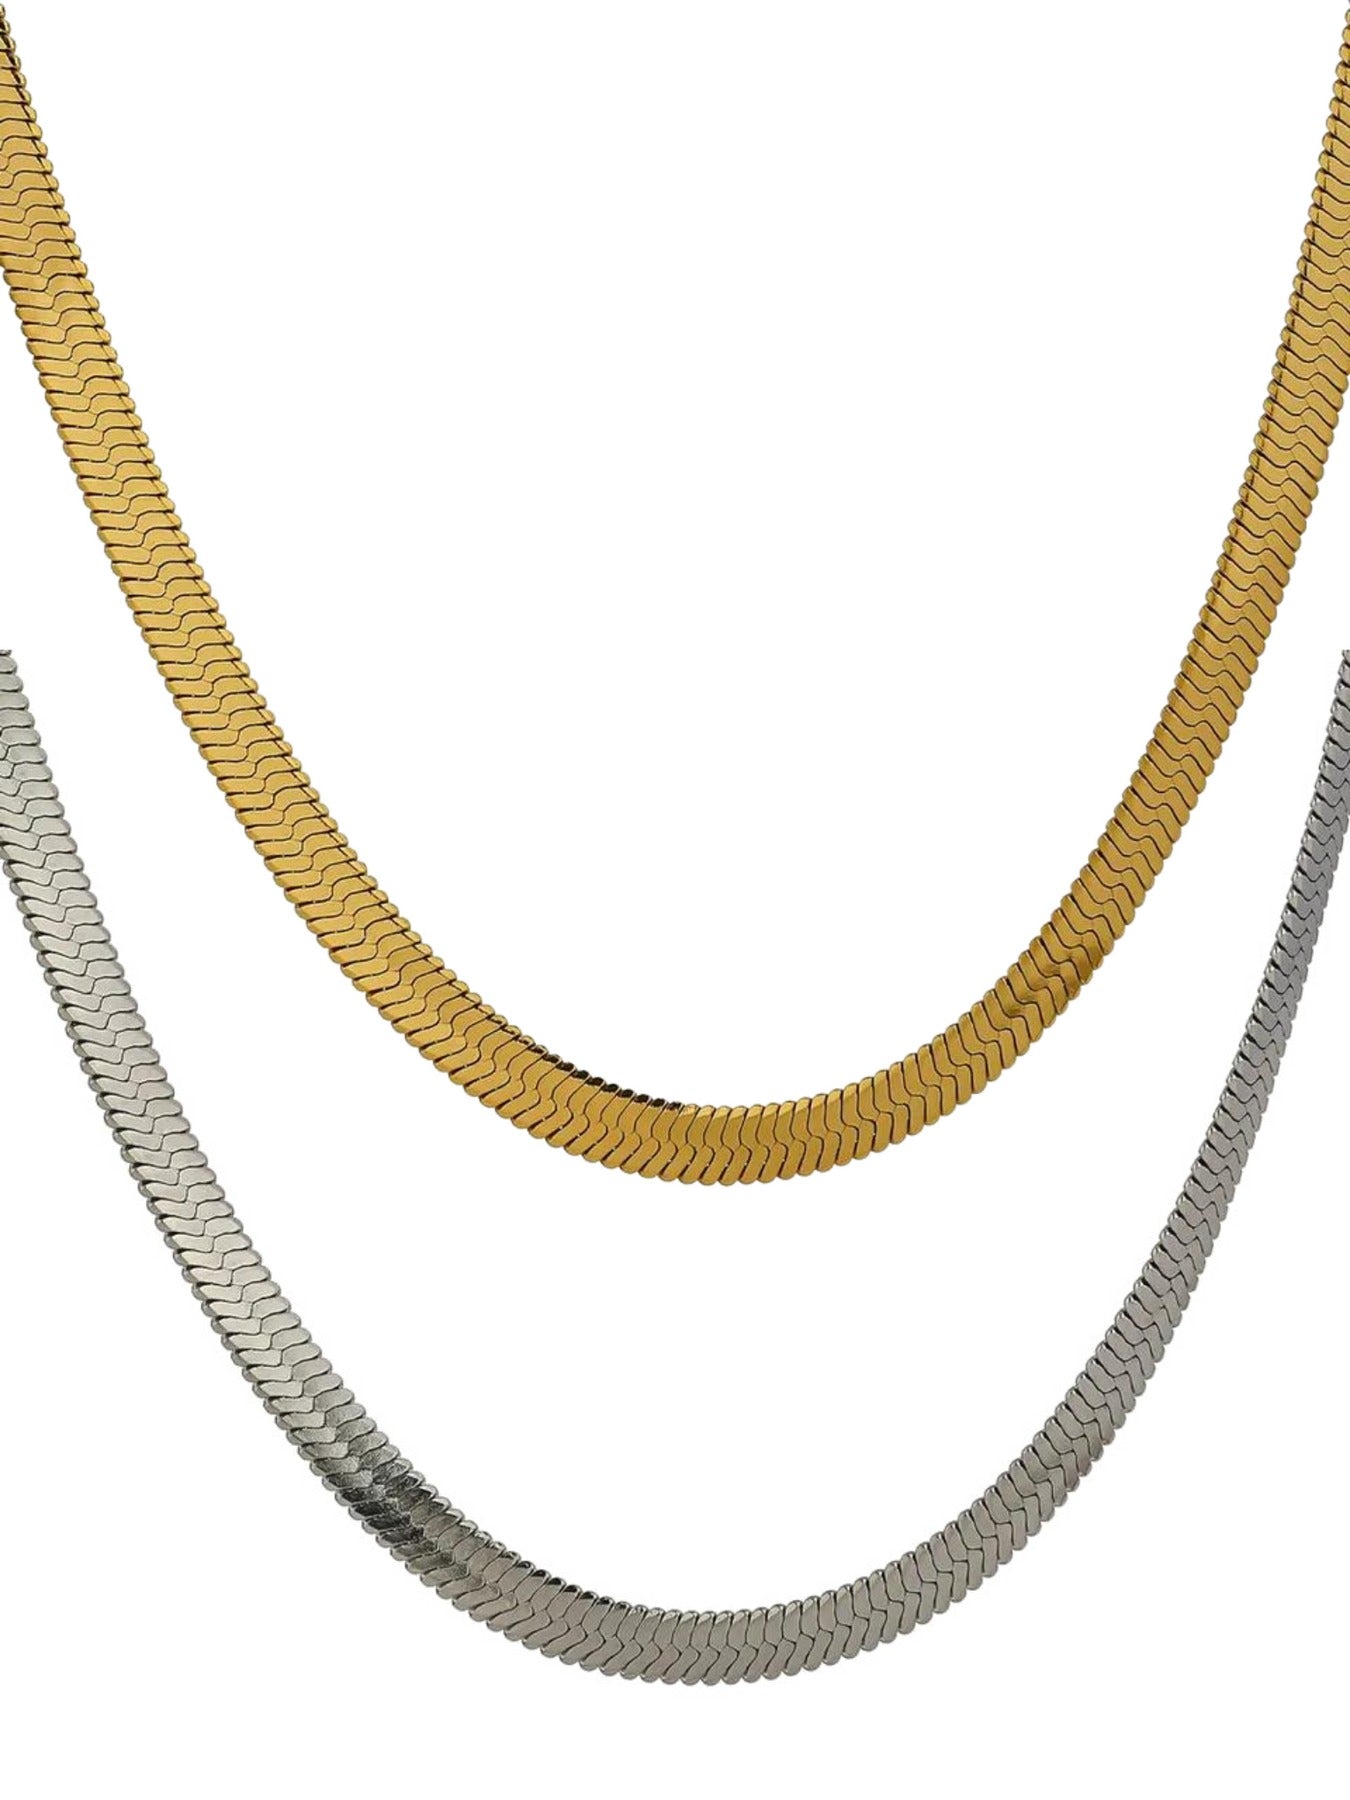 Silver And Gold Snake Chain